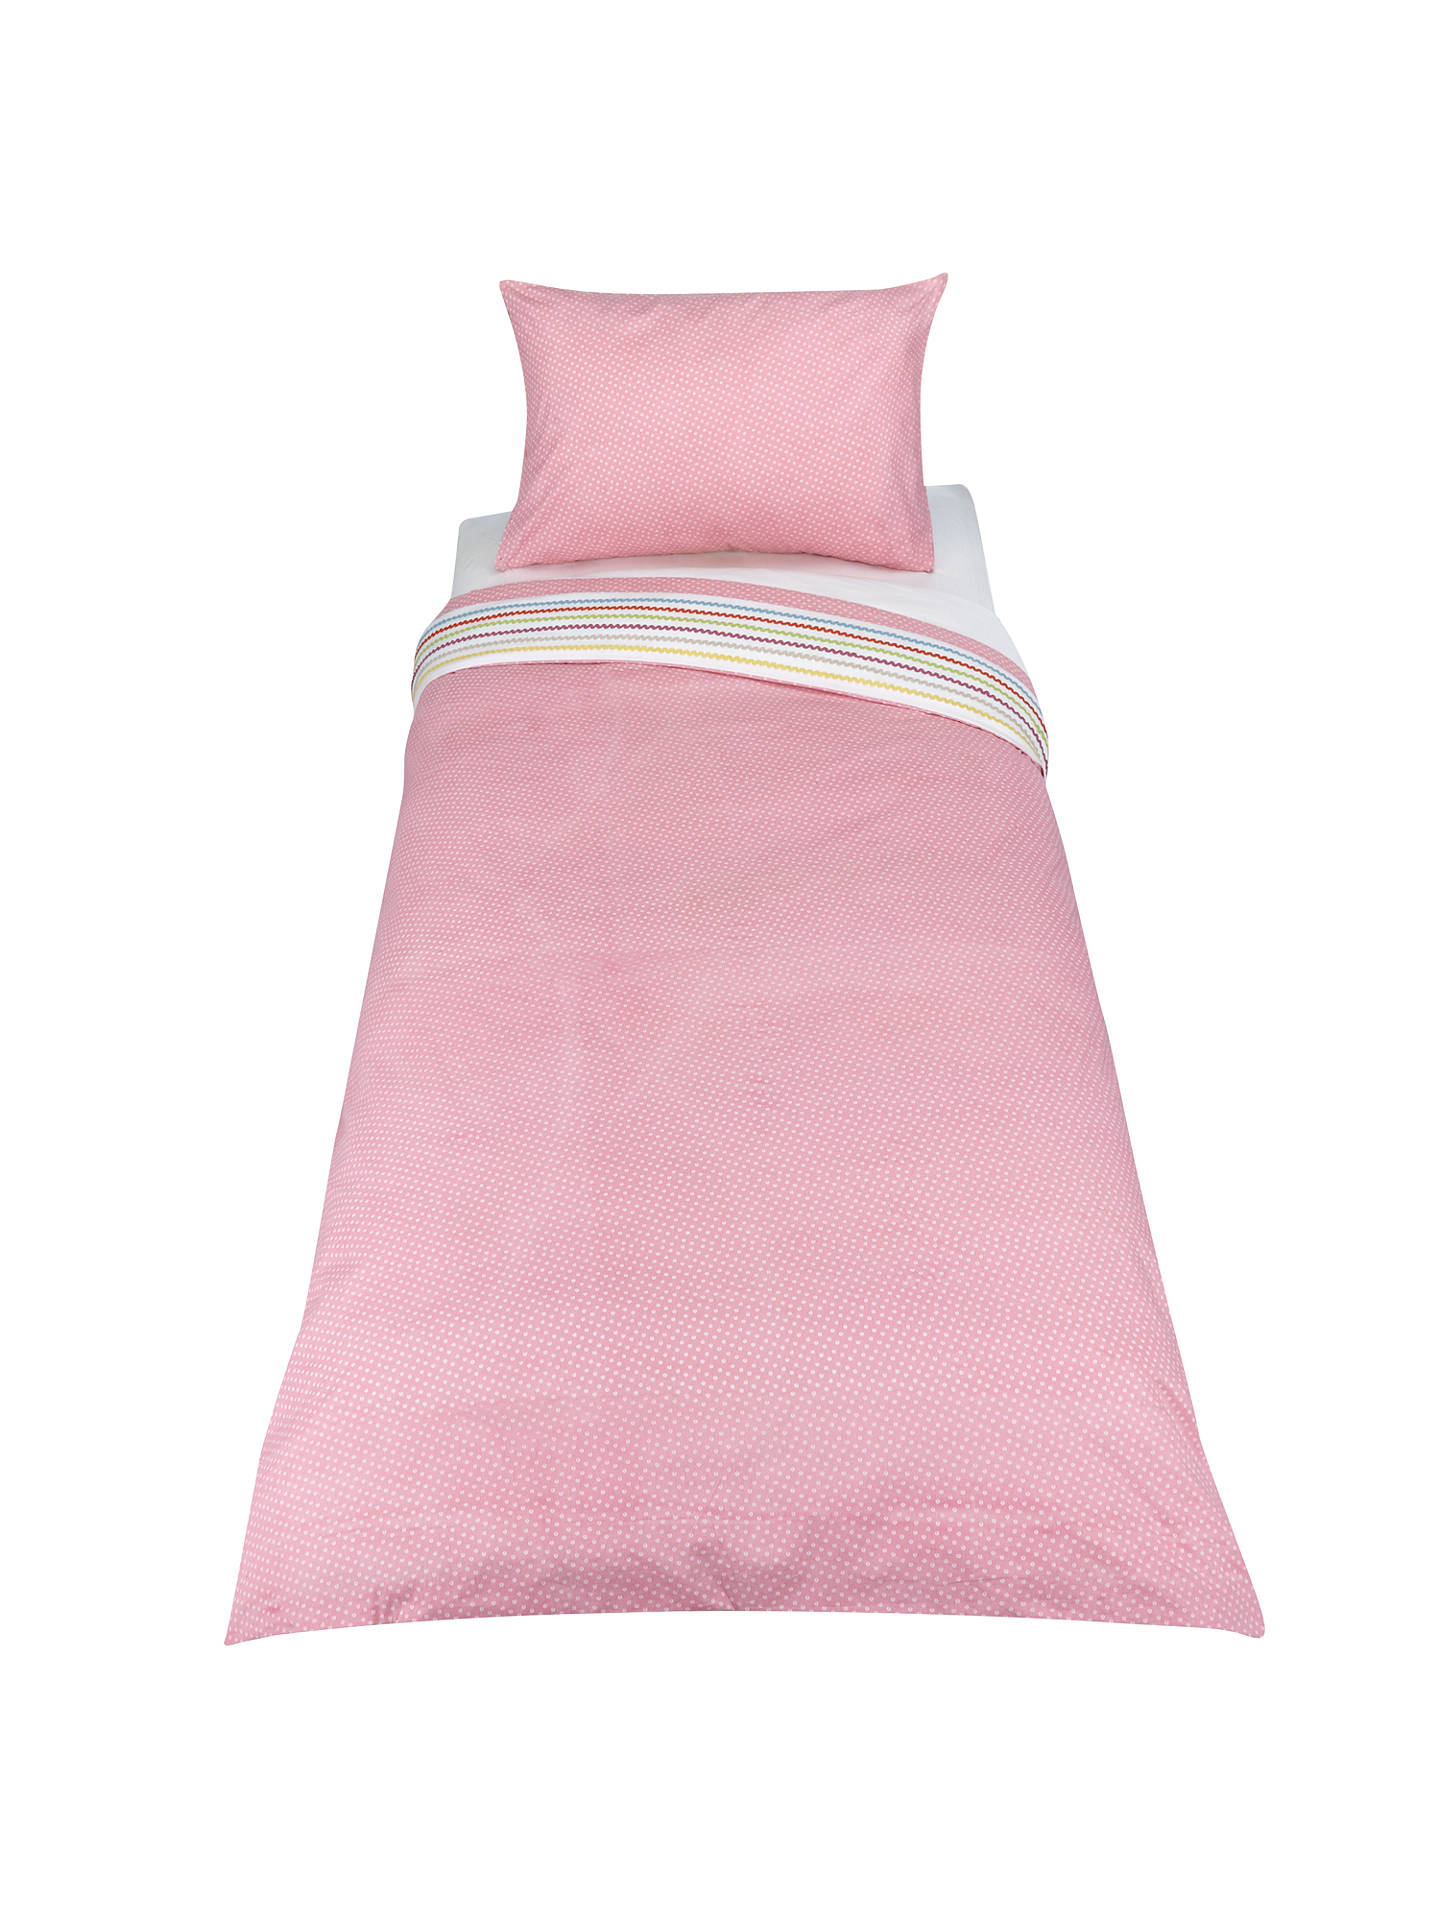 Little Home At John Lewis Butterfly Embroidered Duvet Cover And